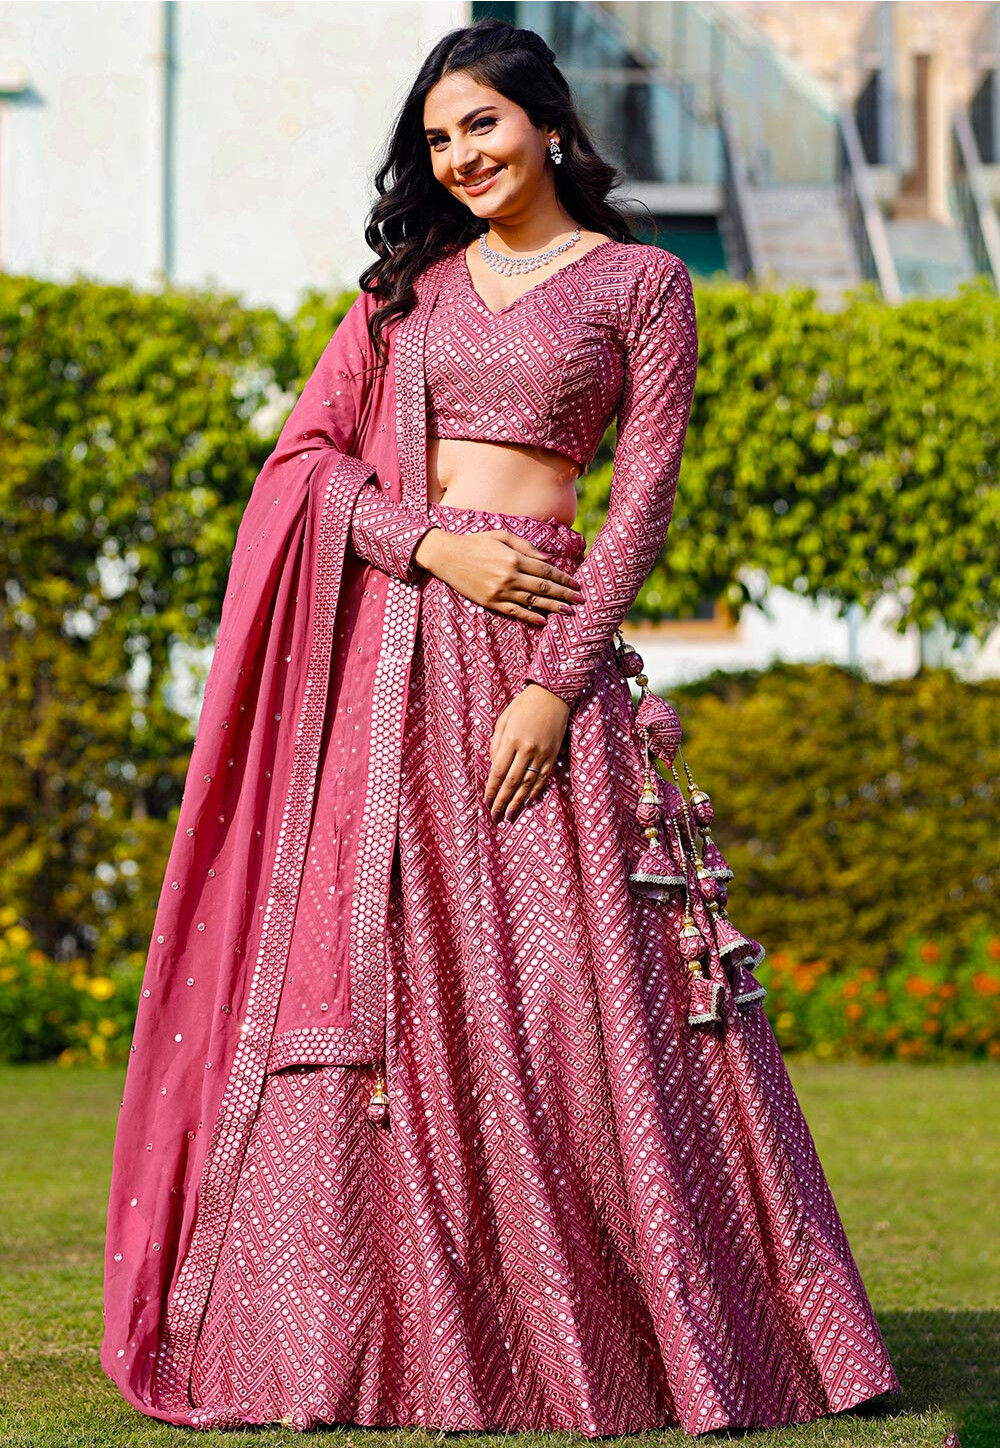 Lehenga Collection in All Styles, Sizes, Fabrics, Colors and Designs